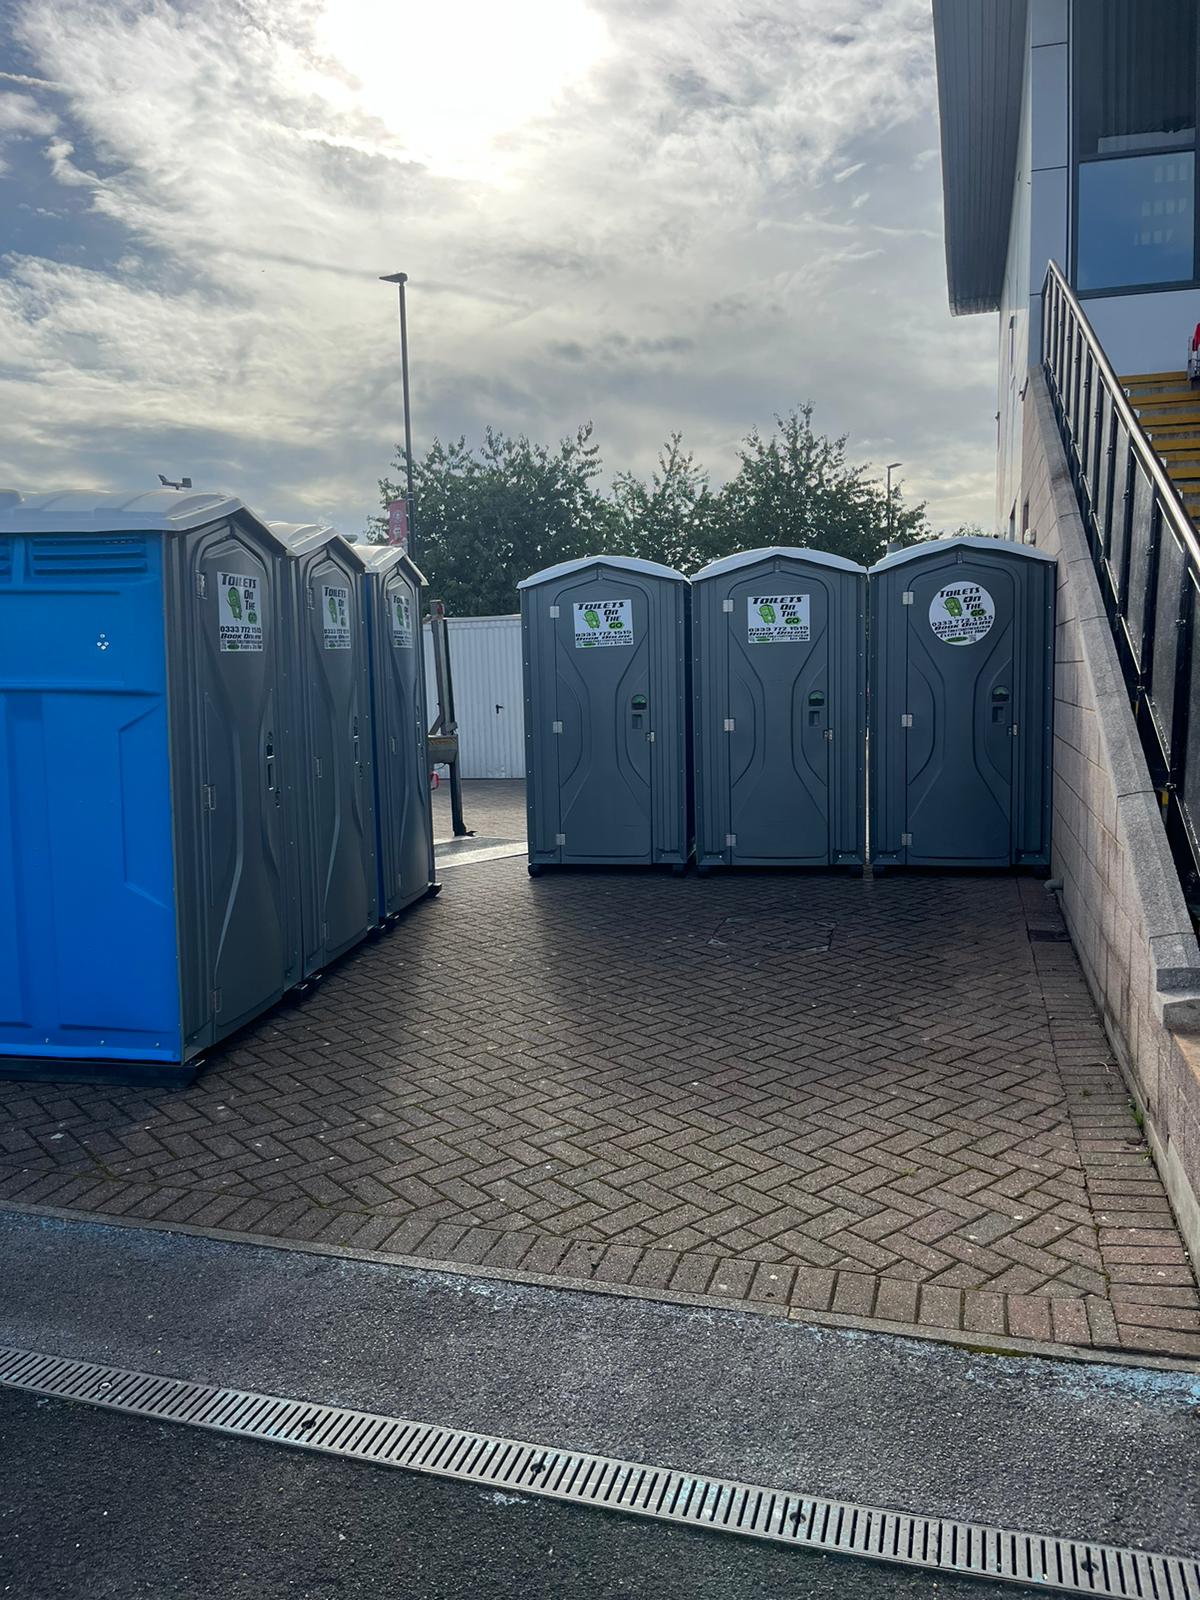 Gallery | Portable Toilet Loo Hire Rental Company in North West uk and Manchester gallery image 50